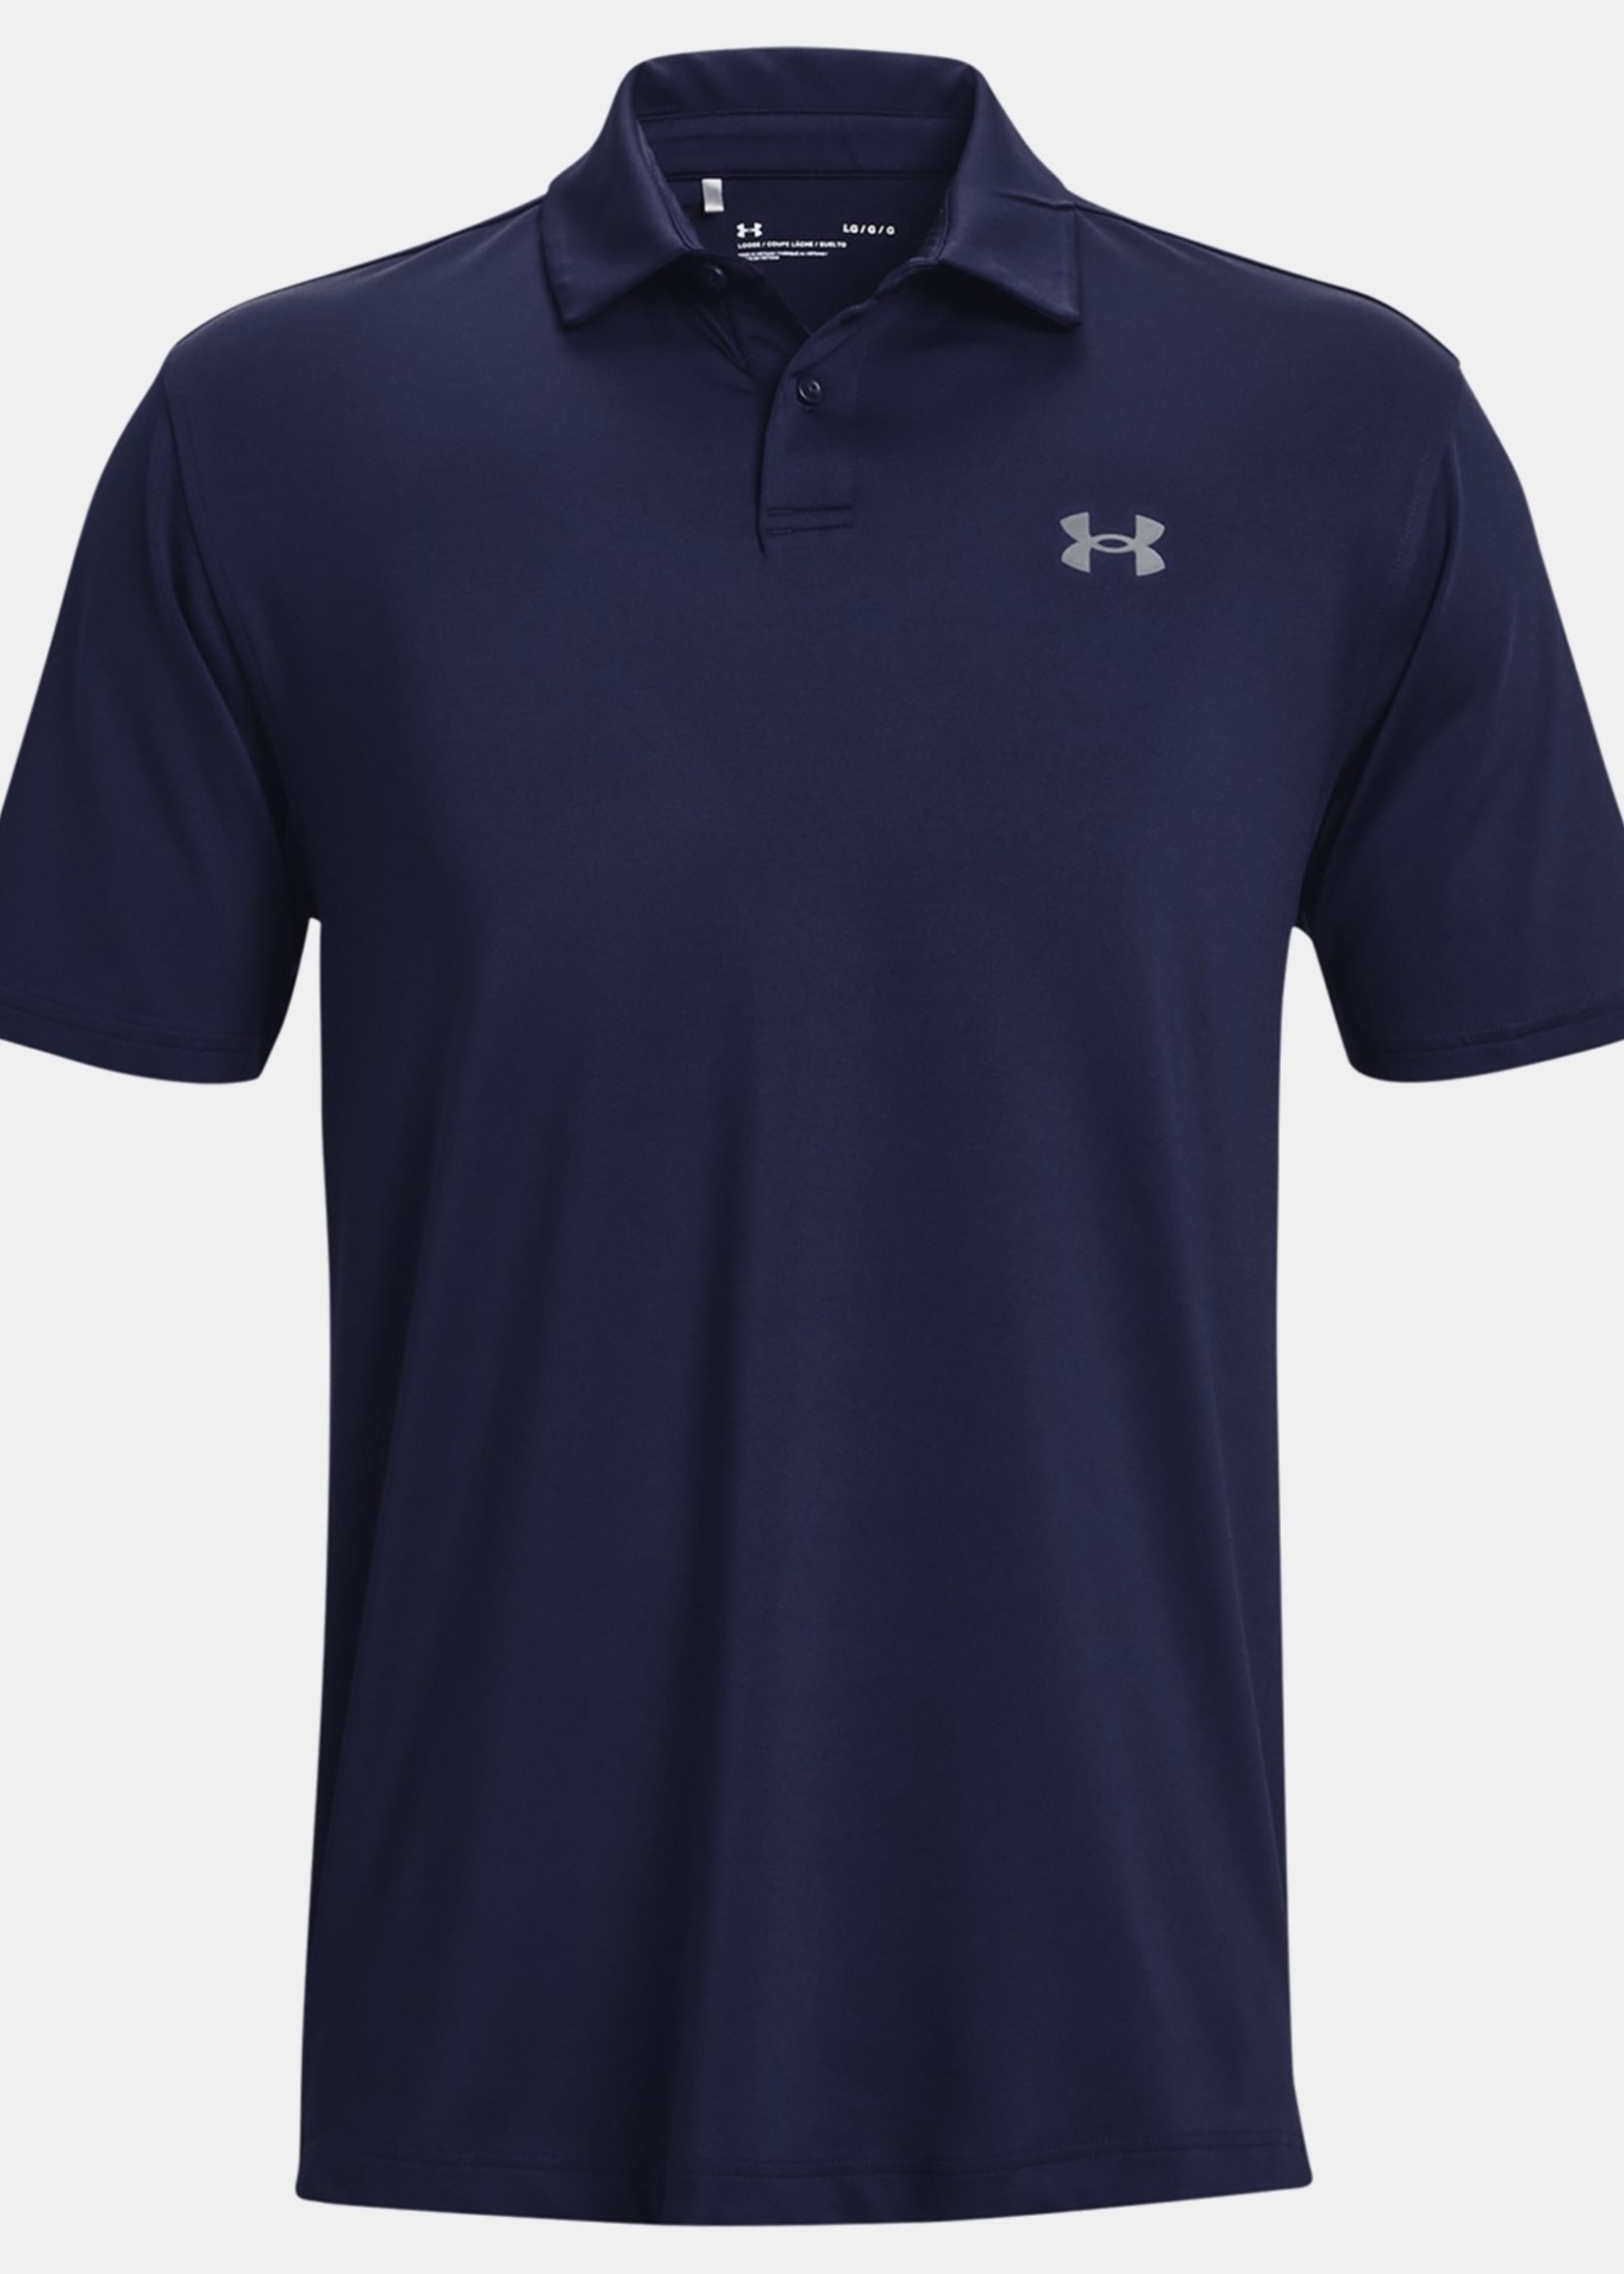 Under Armour Tee To Green Polo